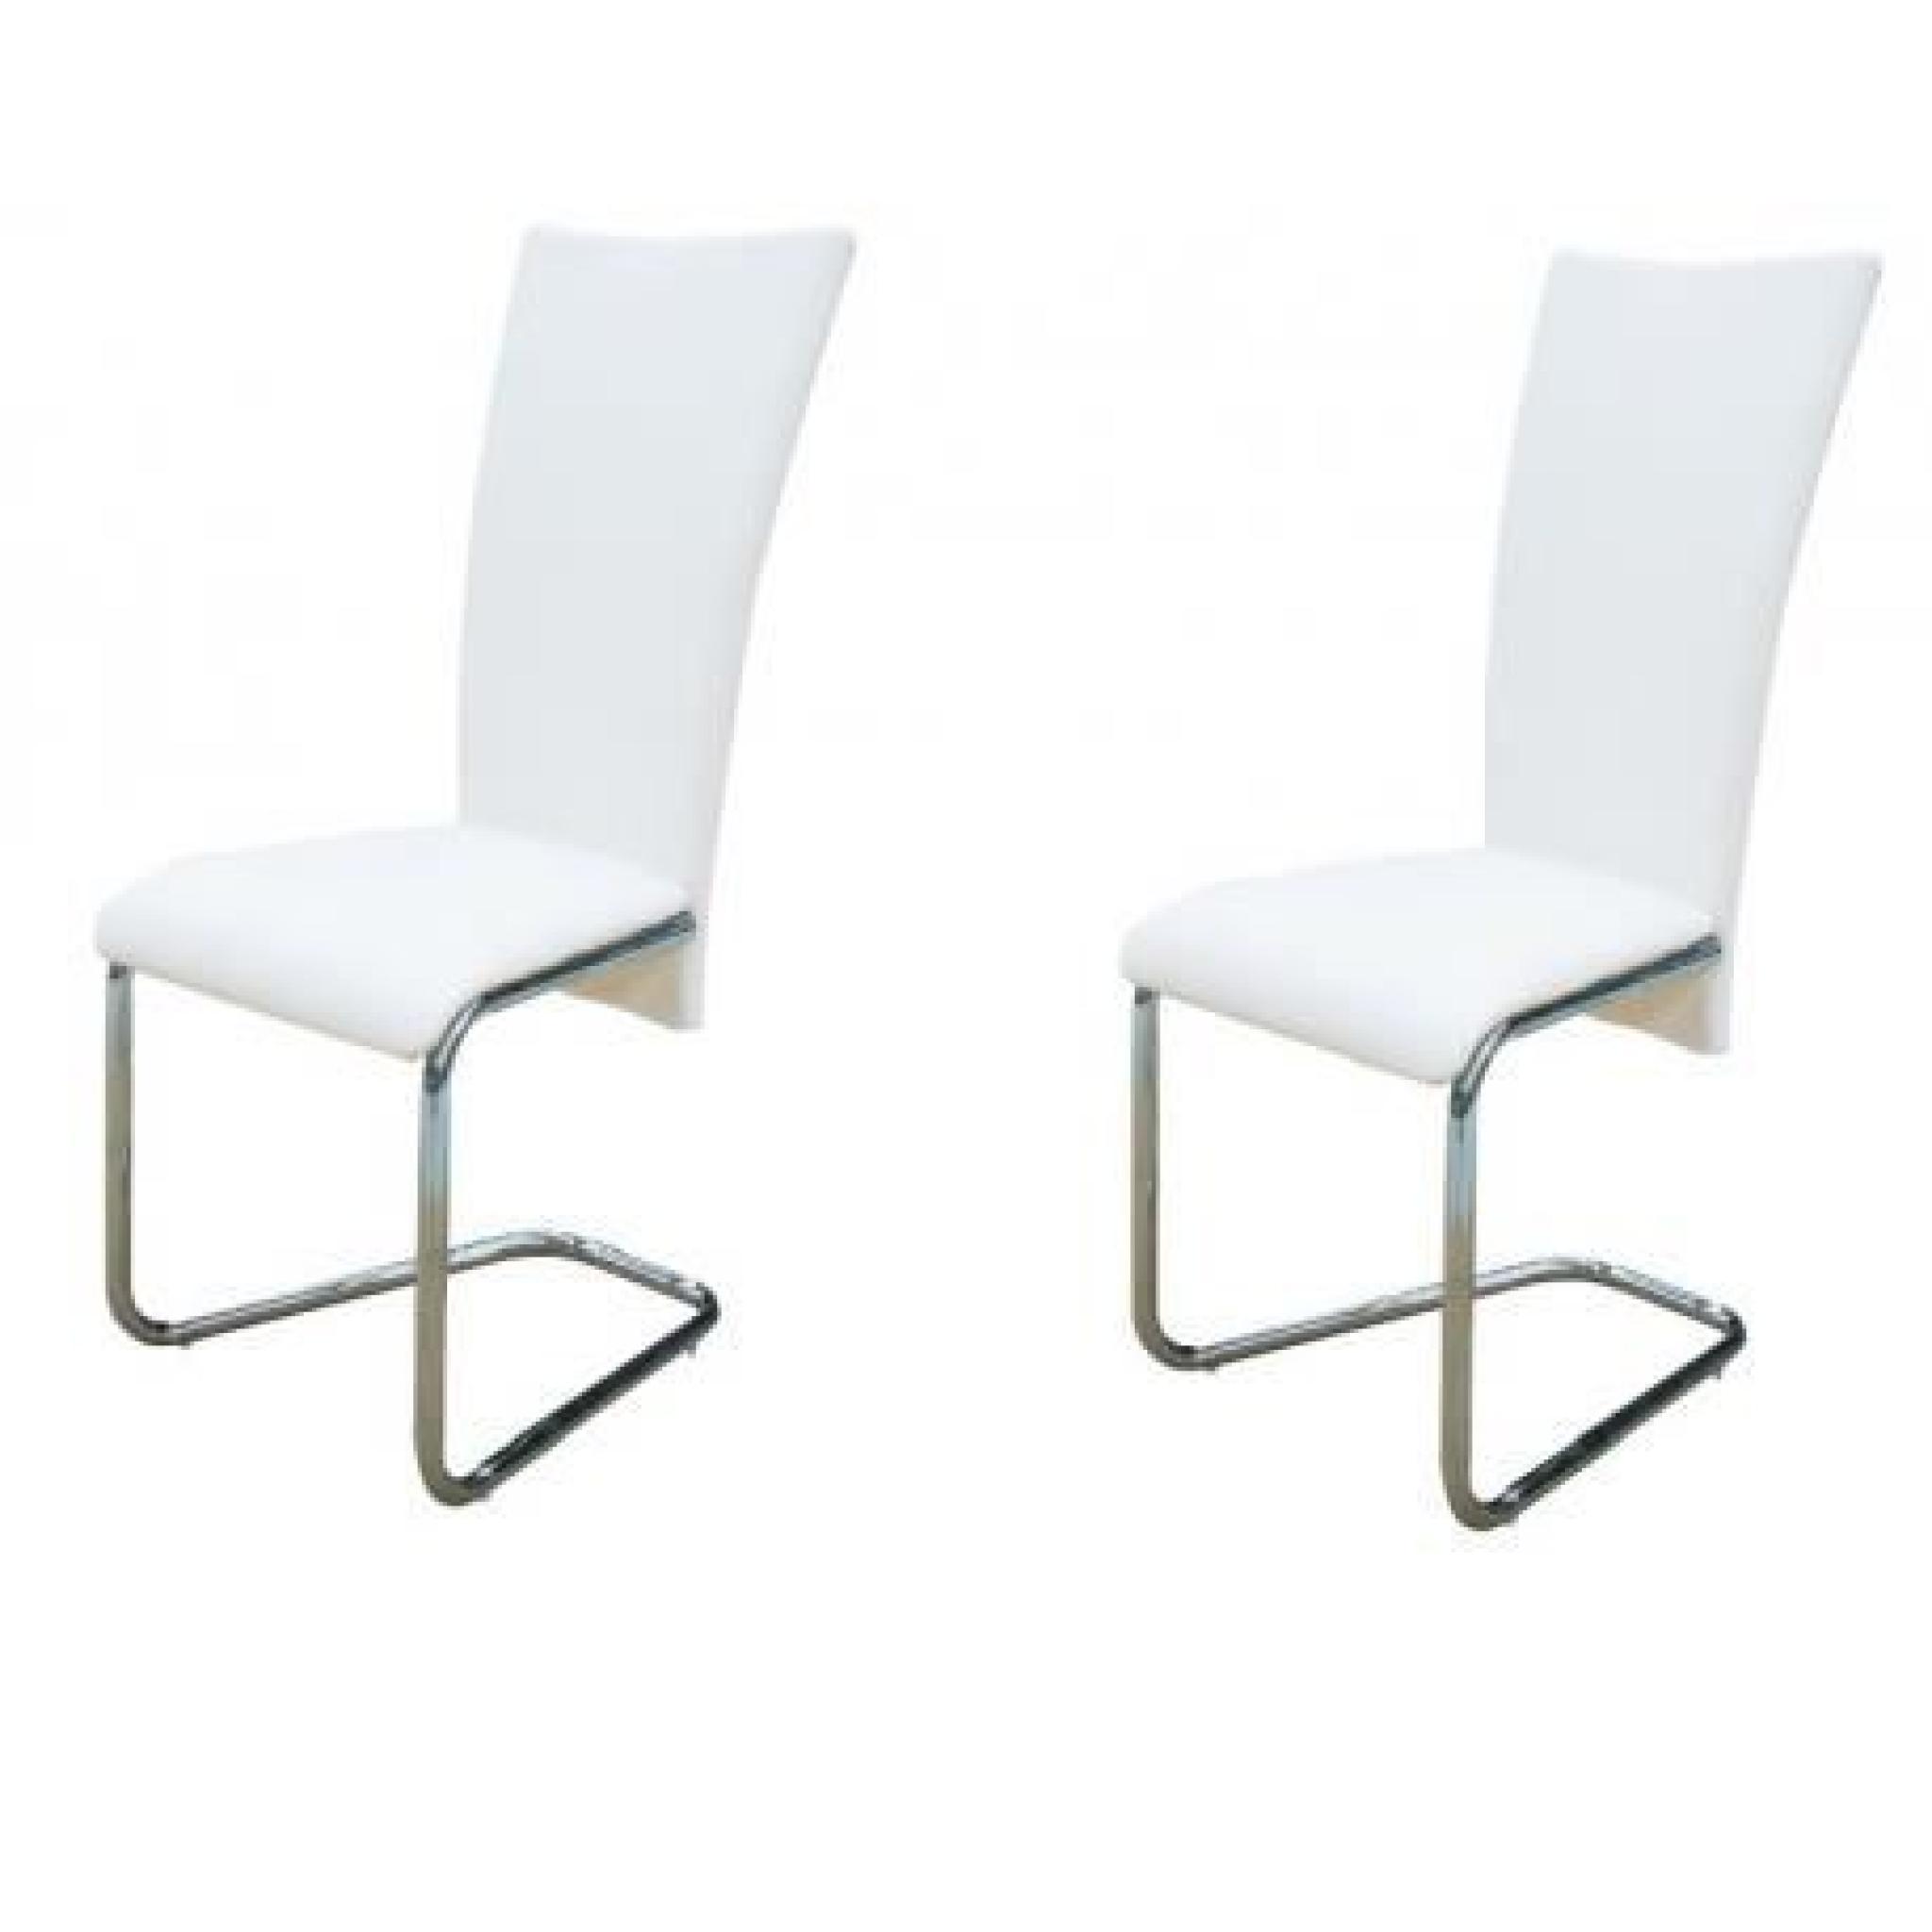 2 chaises ultra design blanches Stylashop pas cher